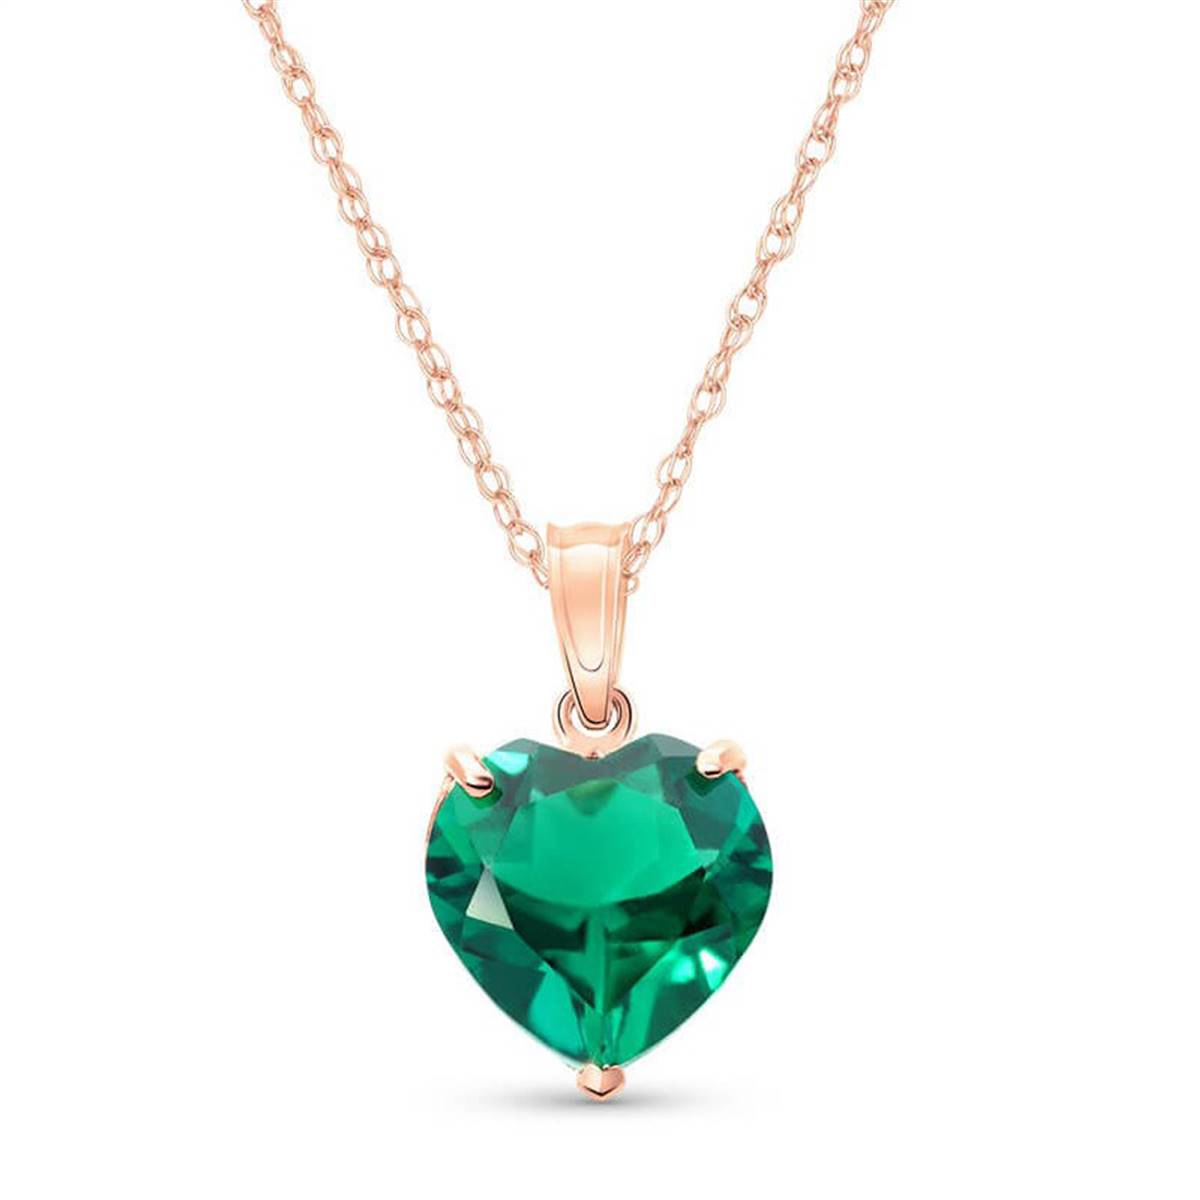 14K Solid Rose Gold Necklace With Heart Shape 2.75 ctw High Polished Genuine Emerald - Grade AAA